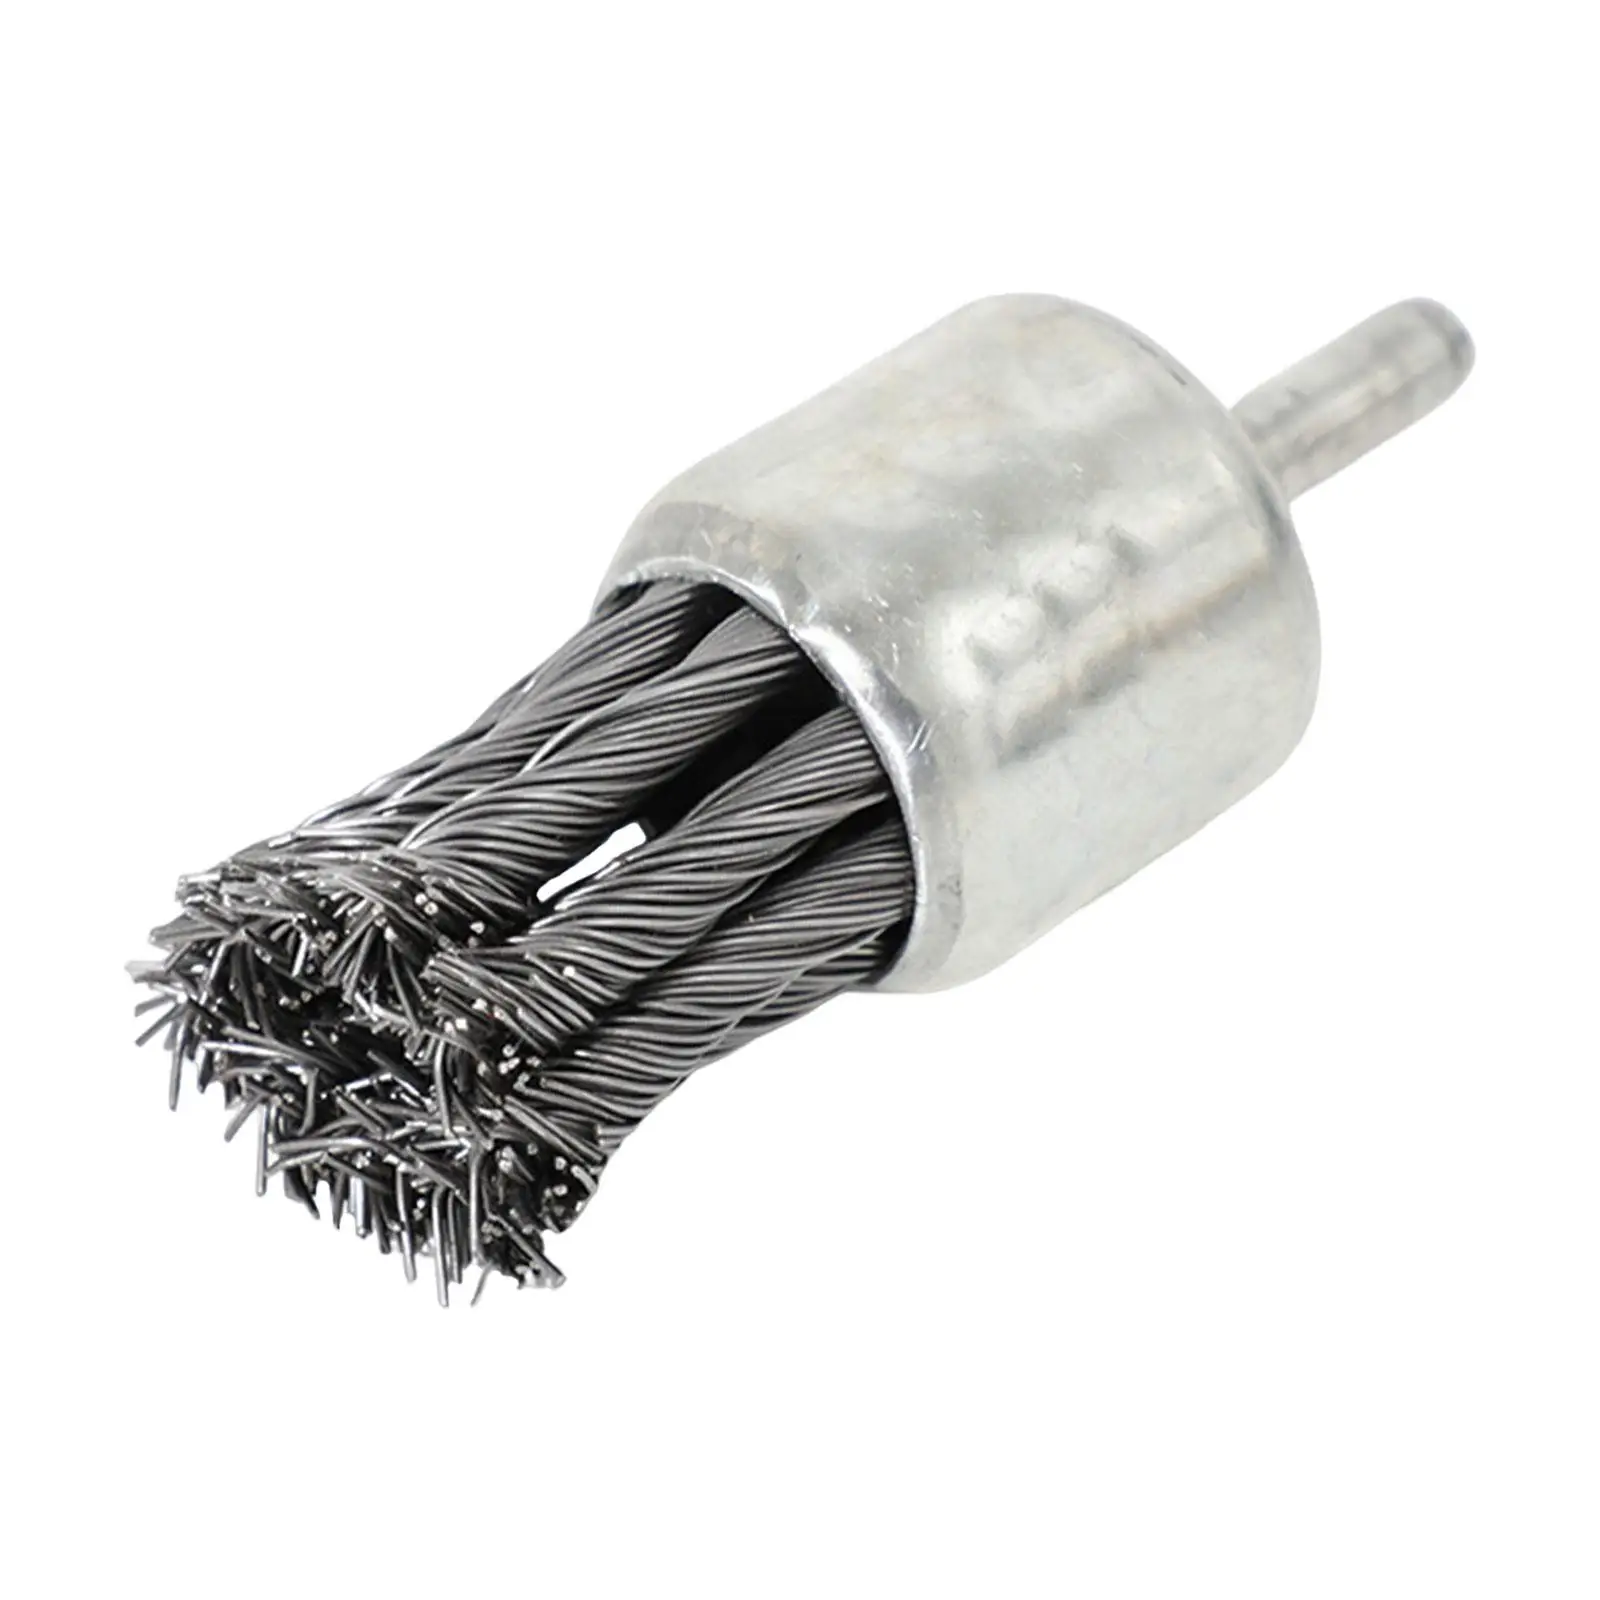 Steel Wire Brush Cleaning Rust, and Steel Replacement Accessory Metal Derusting Brush for Drill